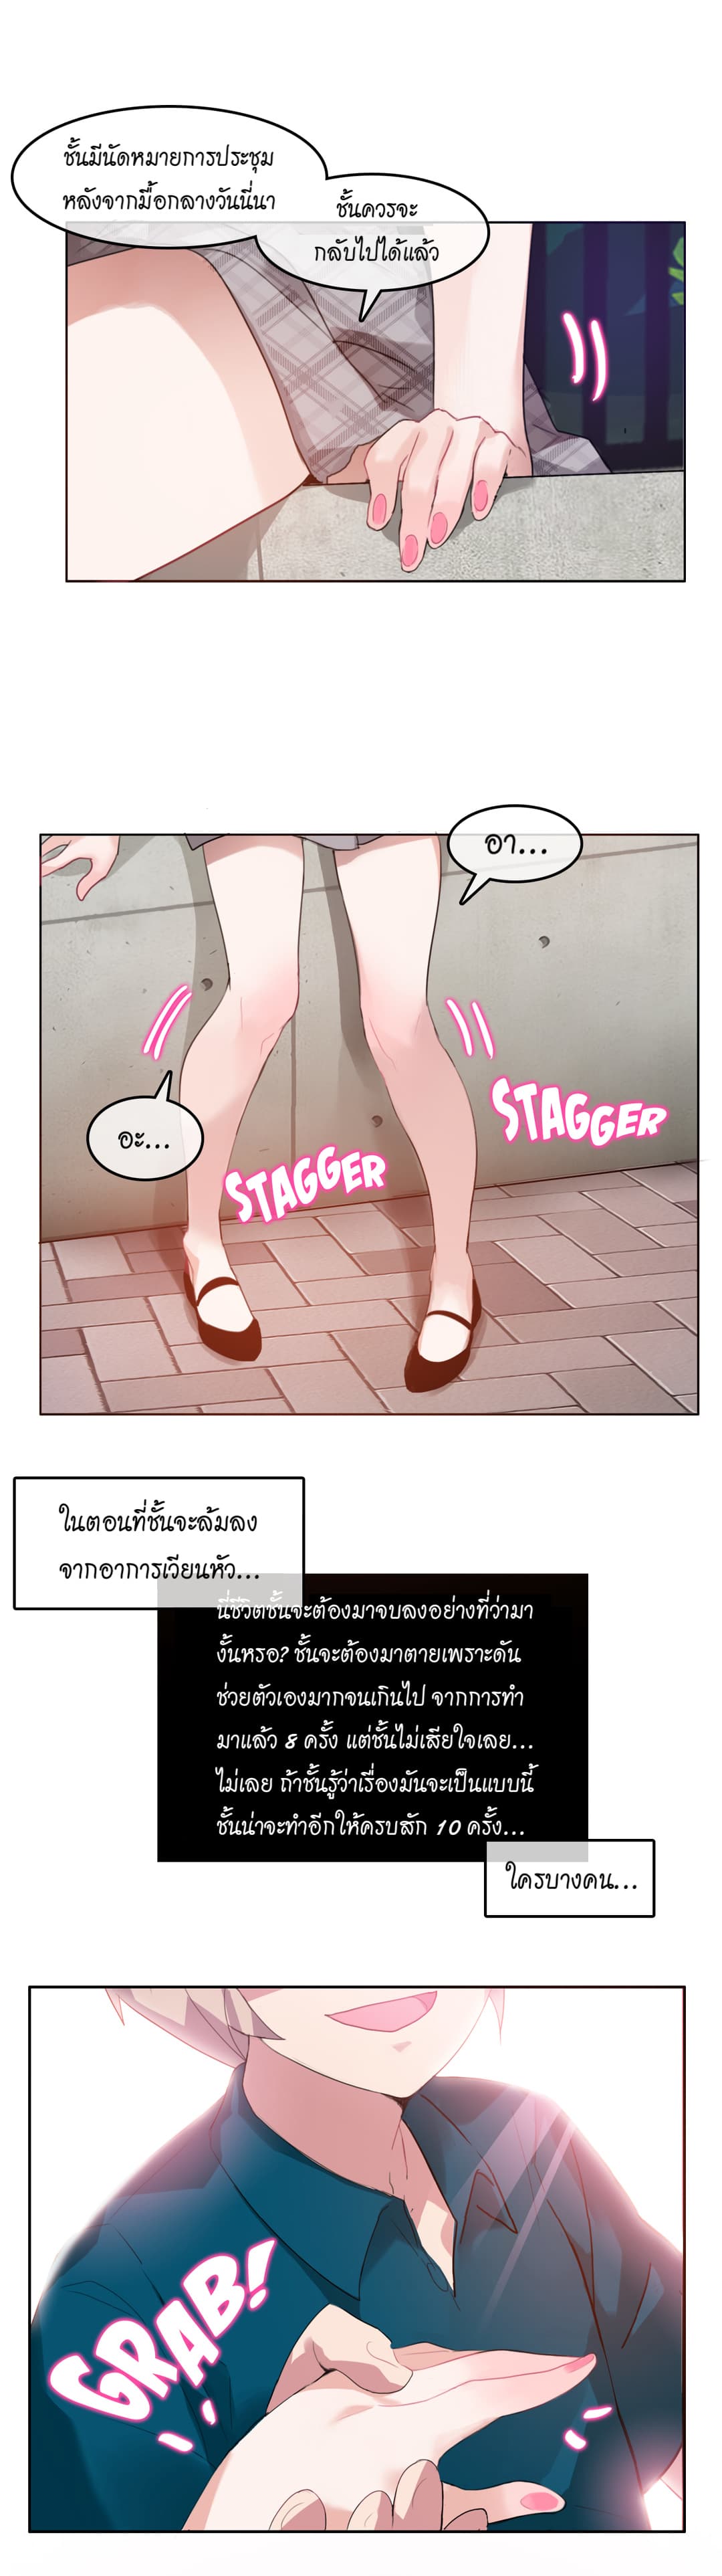 A Pervert’s Daily Life 5 (19)